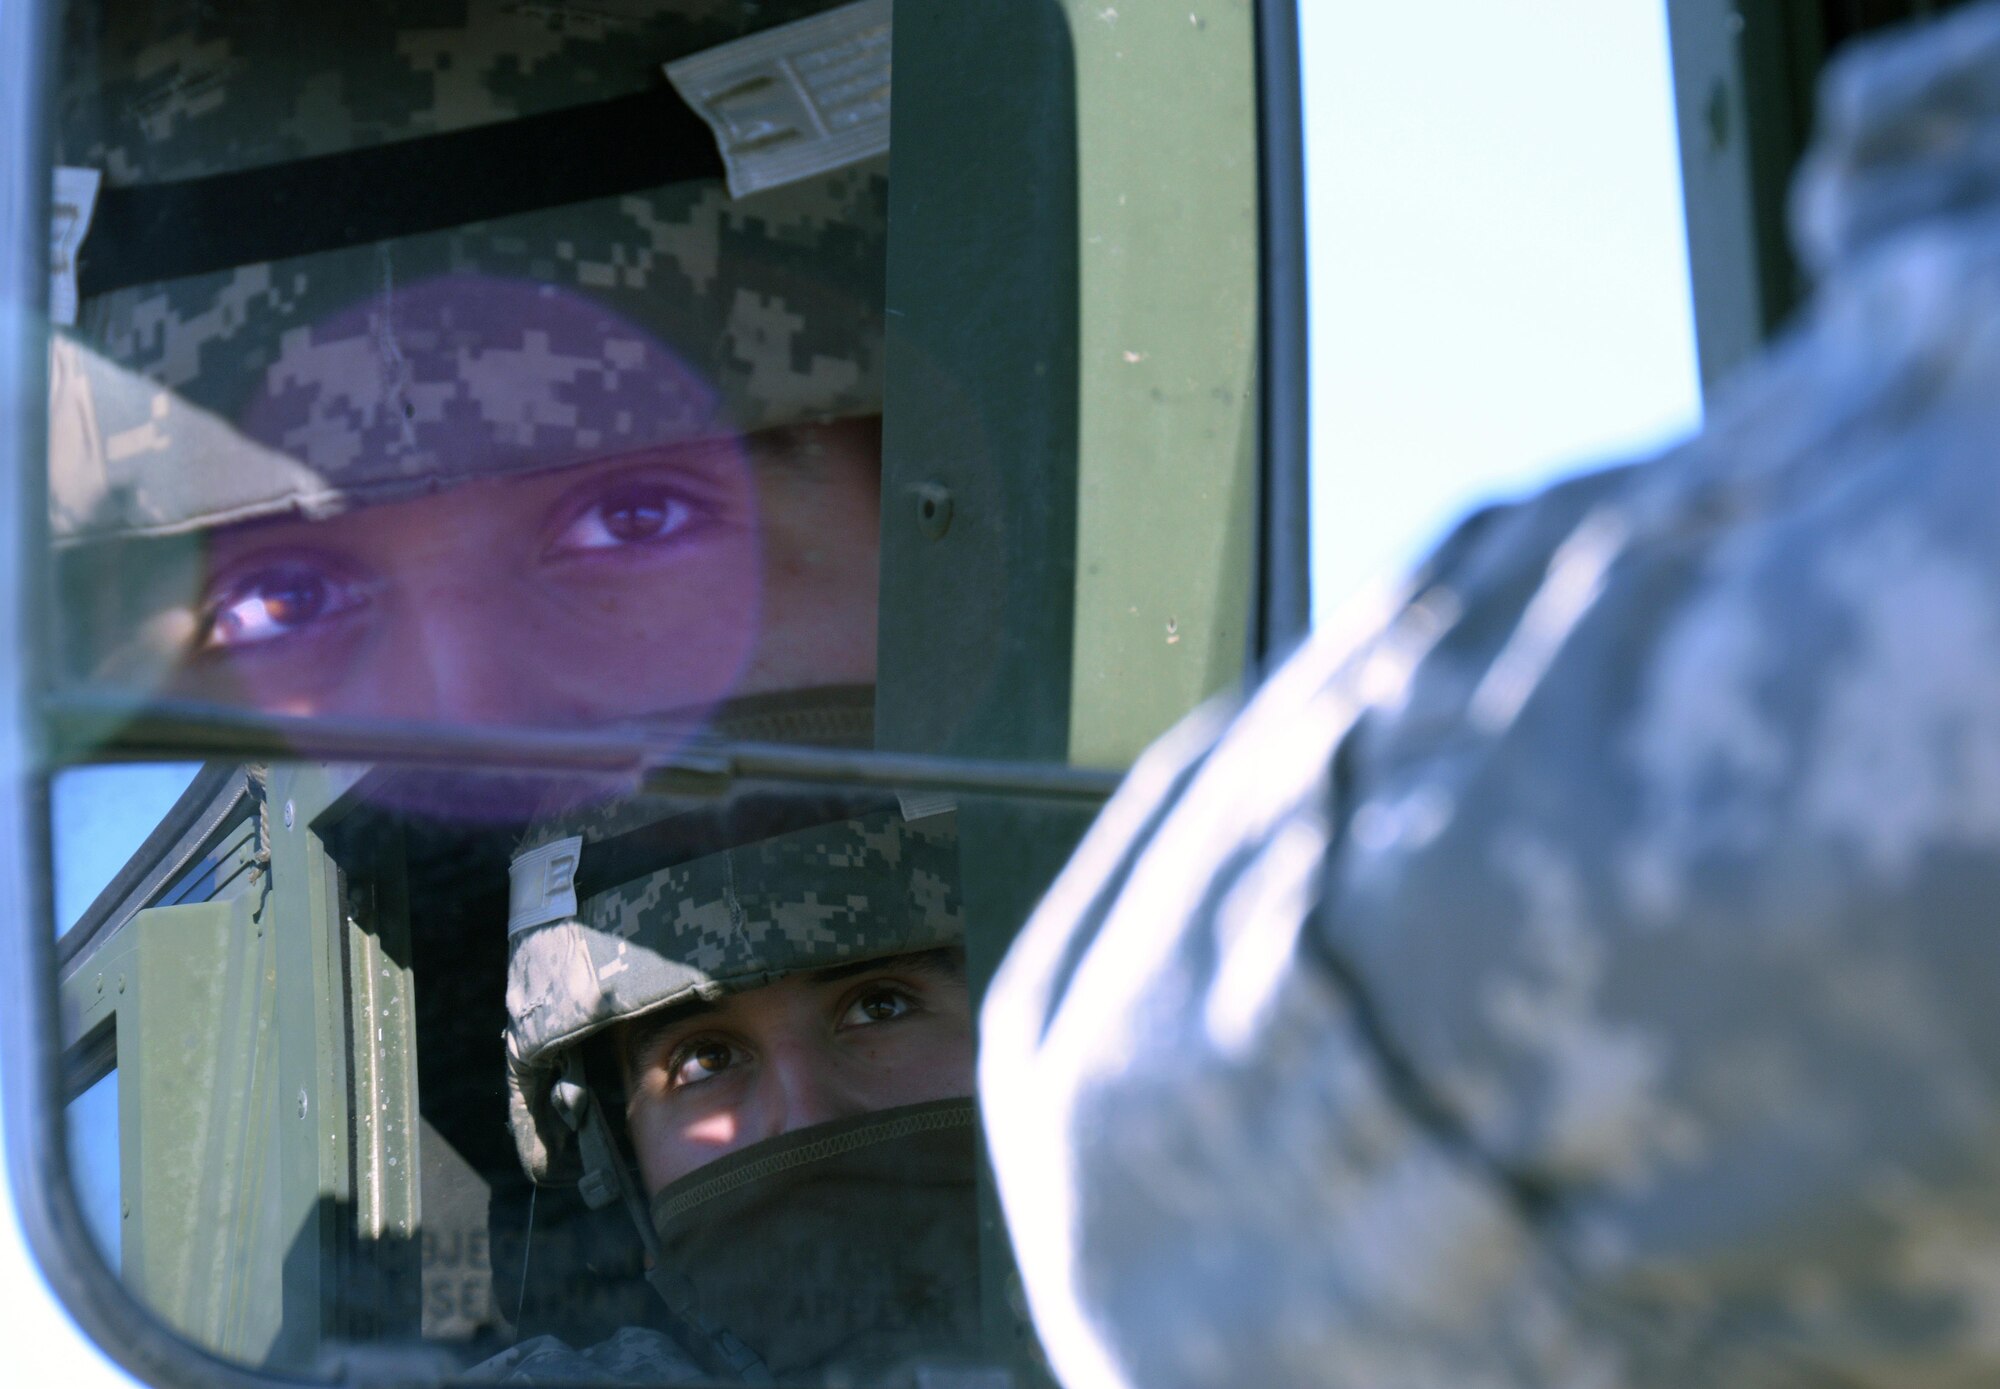 Specialist Michael Larriega, 801st Engineer Company horizontal engineer, awaits the go ahead for Humvees to be backed into a C-17 Globemaster III prior to its take off from Travis Air Force Base, Calif., for Patriot Wyvern on Feb. 11, 2017. Patriot Wyvern is a hands-on, bi-annual event conducted by the 349th Air Mobility Wing designed to hone combat skills and improve organizational interoperability. (U.S. Air Force photo/Staff Sgt. Daniel Phelps)